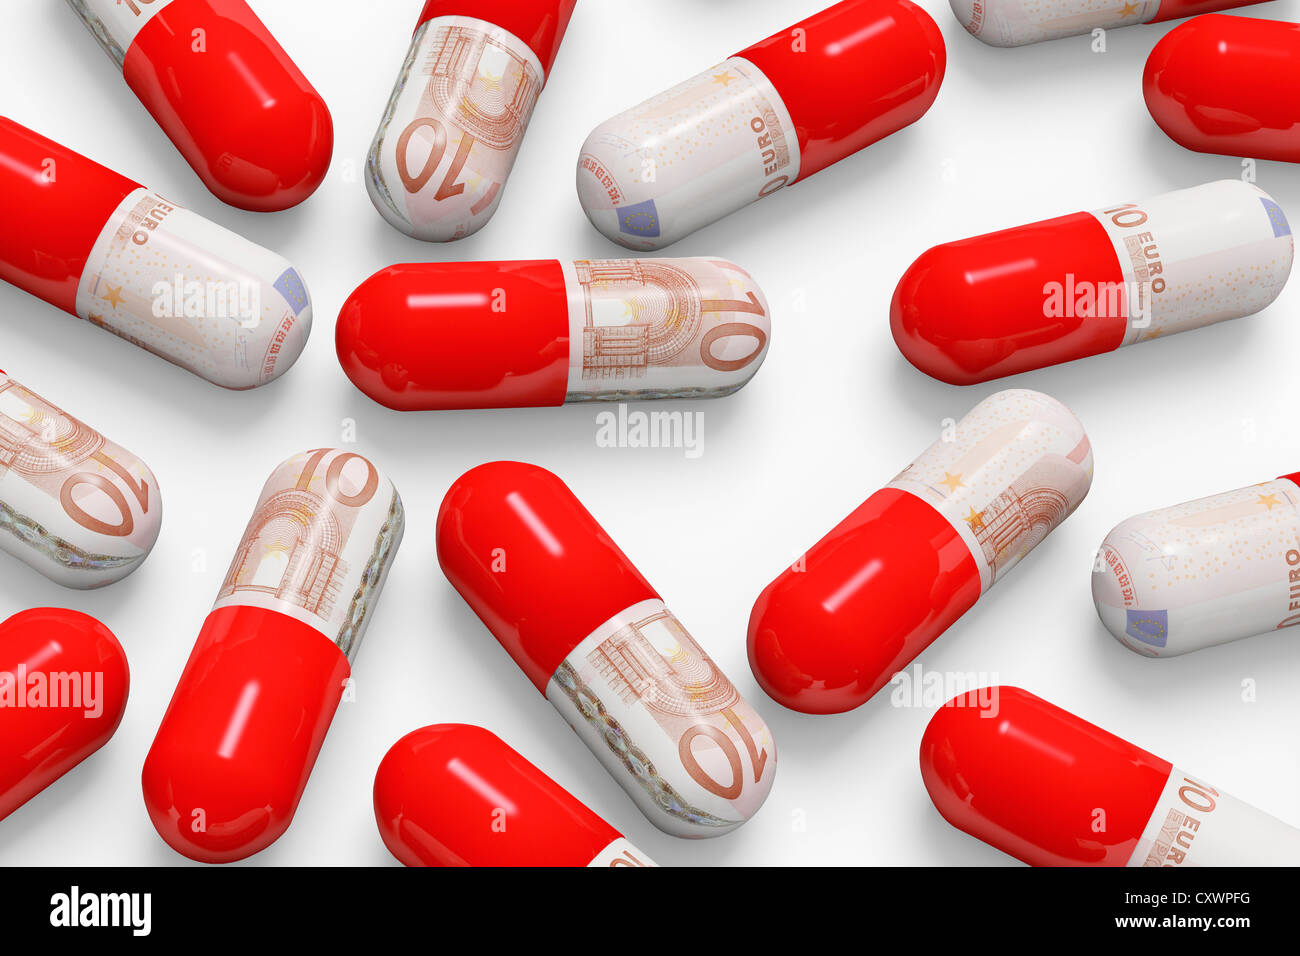 Pills decorated with euro notes Stock Photo